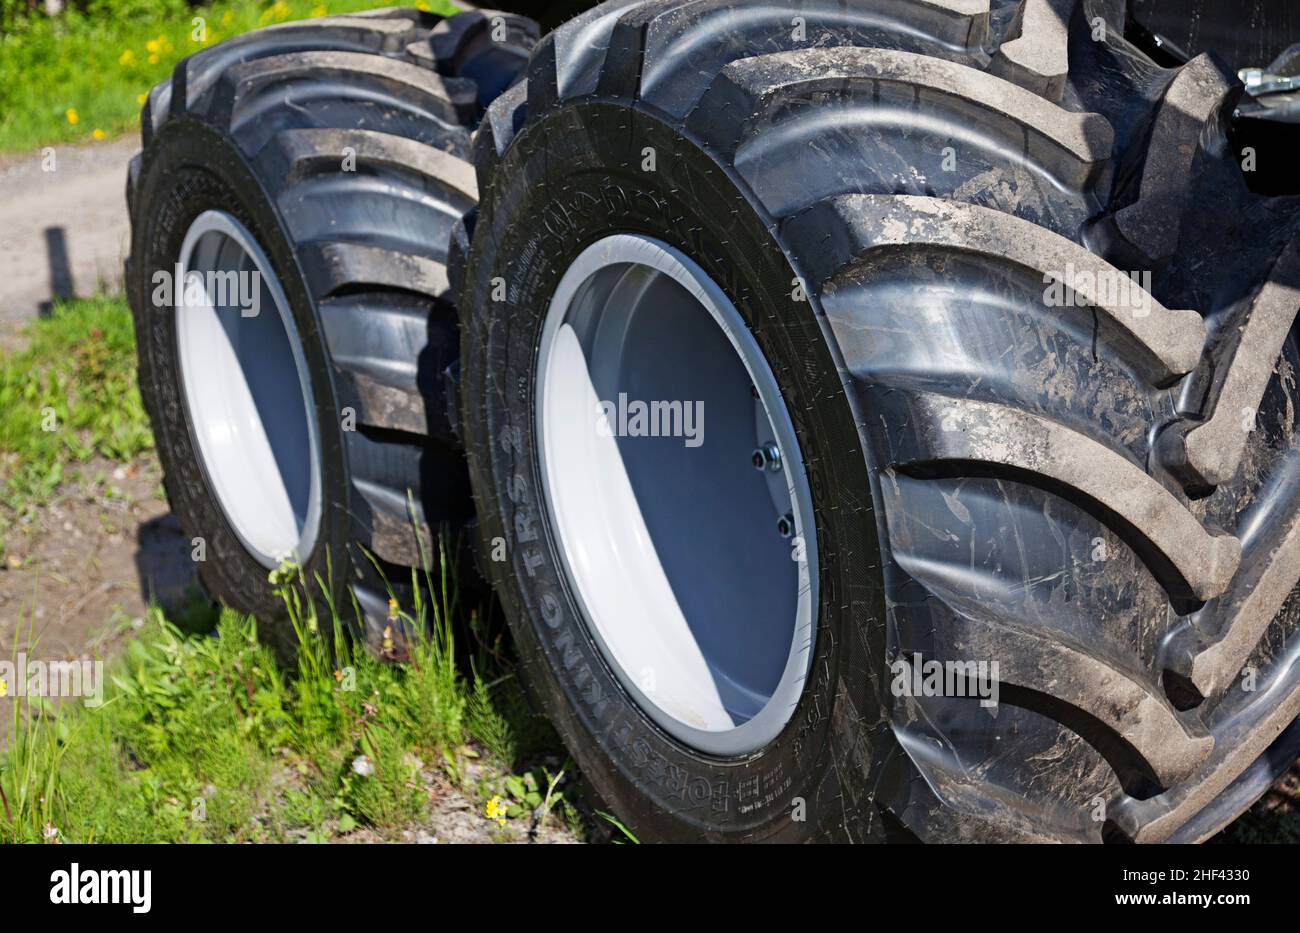 Umea, Norrland Sweden - June 10, 2019: very large tires and wheels for forestry machine Stock Photo